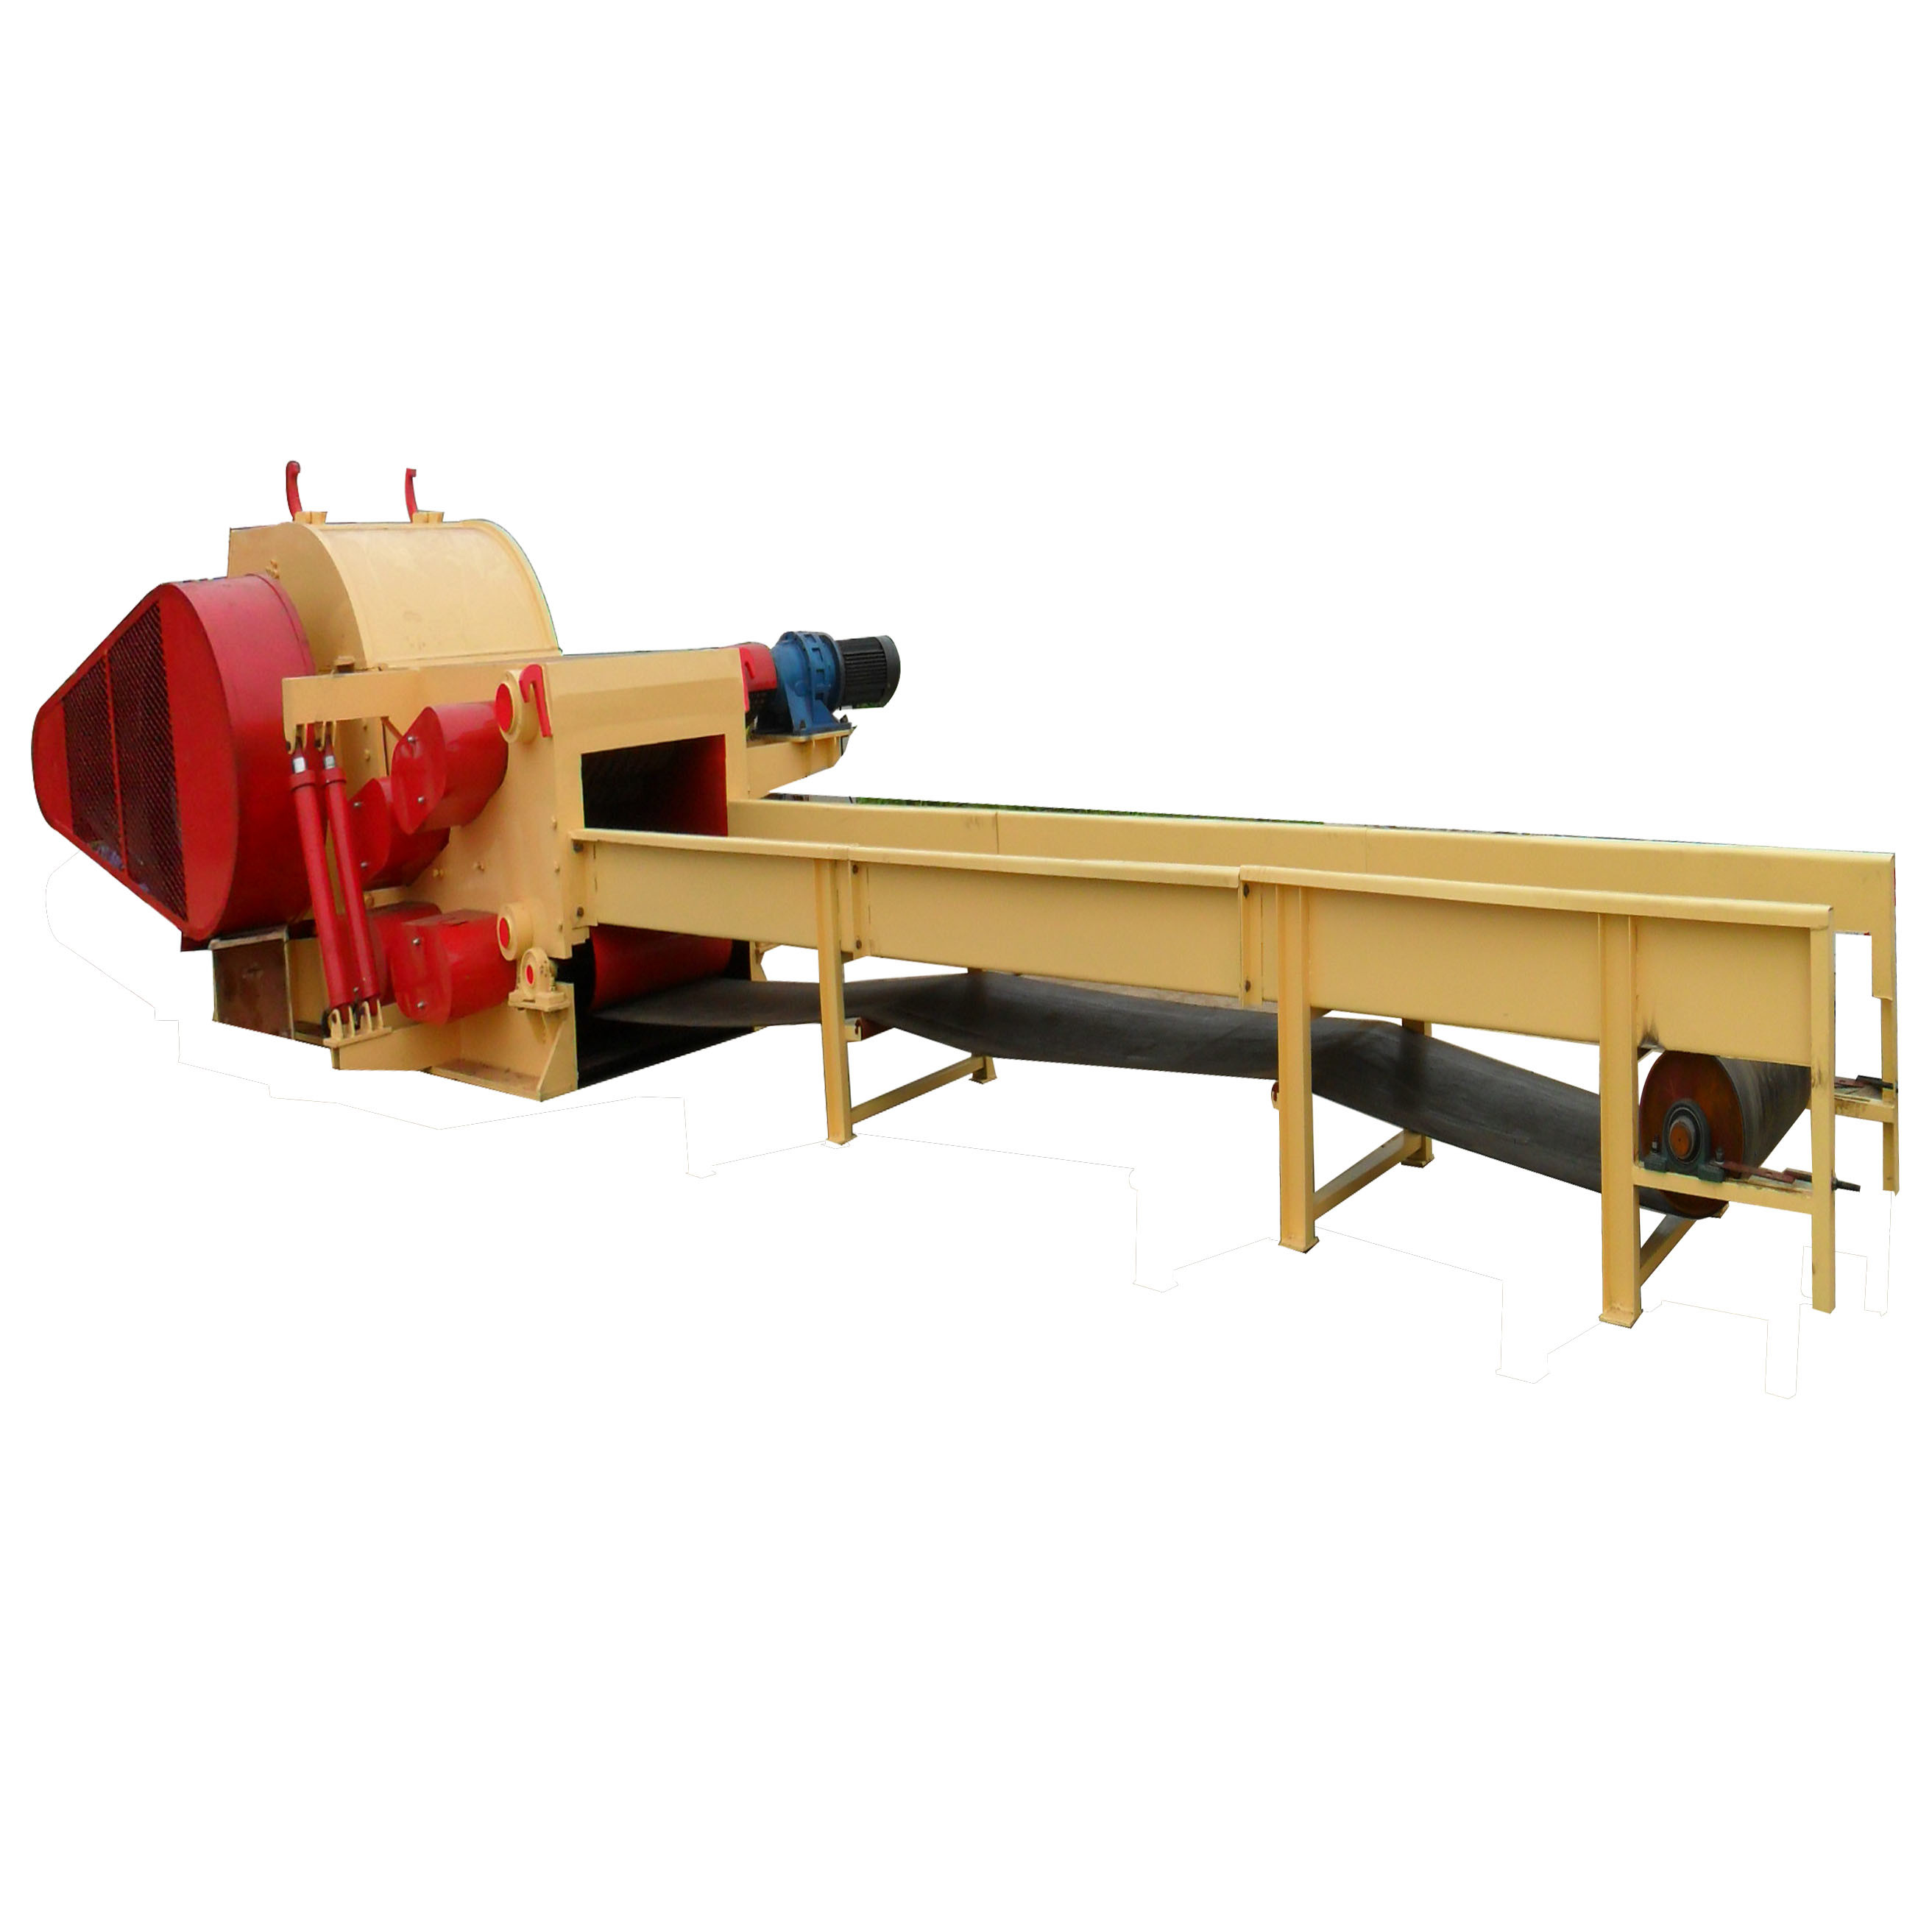 Quality 220kw Waste Wood Shredder For Paper Mill / For Power Plant for sale